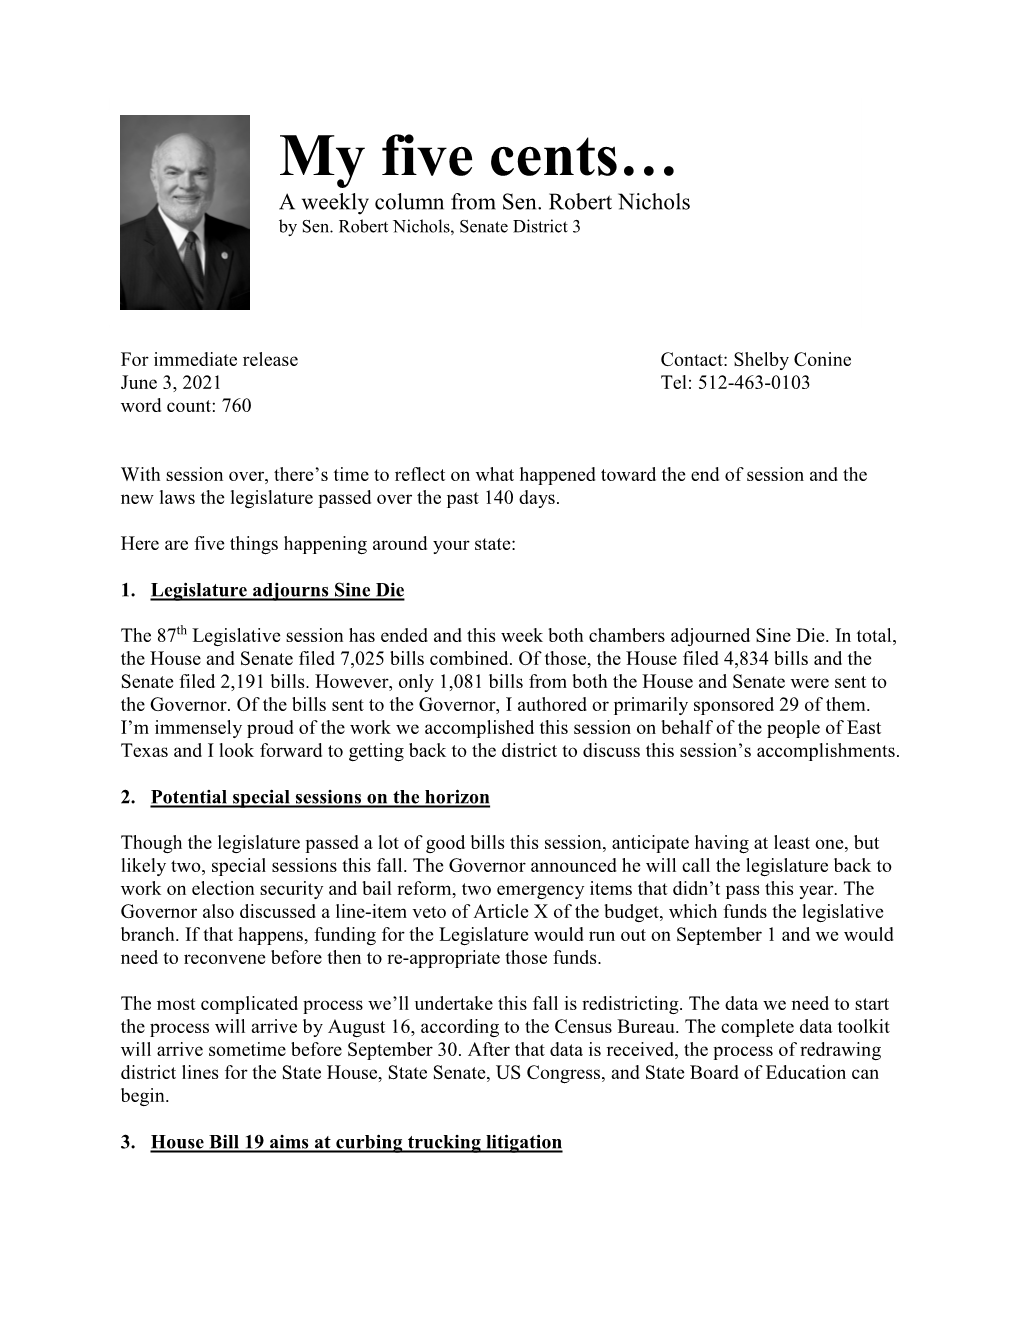 My Five Cents… a Weekly Column from Sen